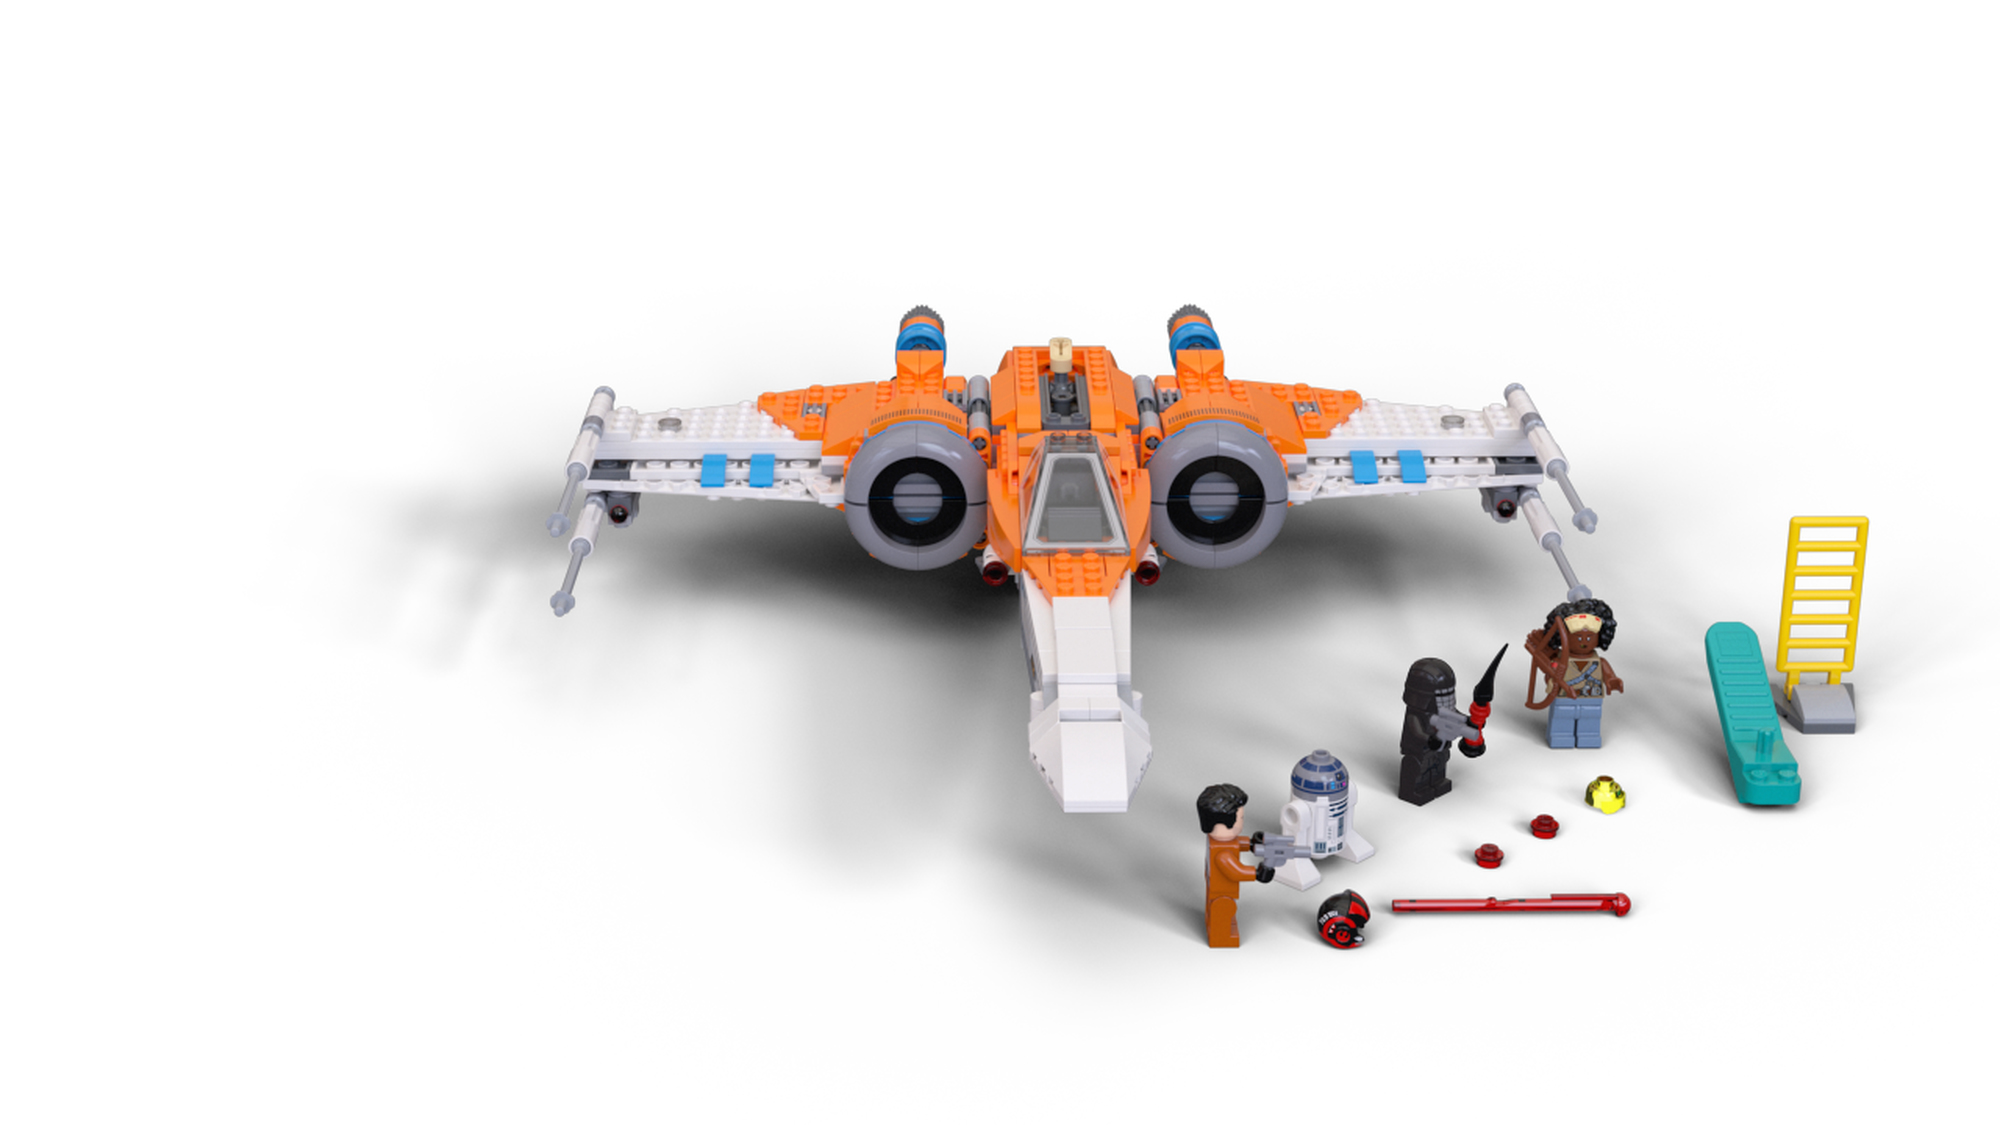 LEGO 75273 Star Wars Poe Dameron's X-wing Fighter Building Kit, 761 Pieces